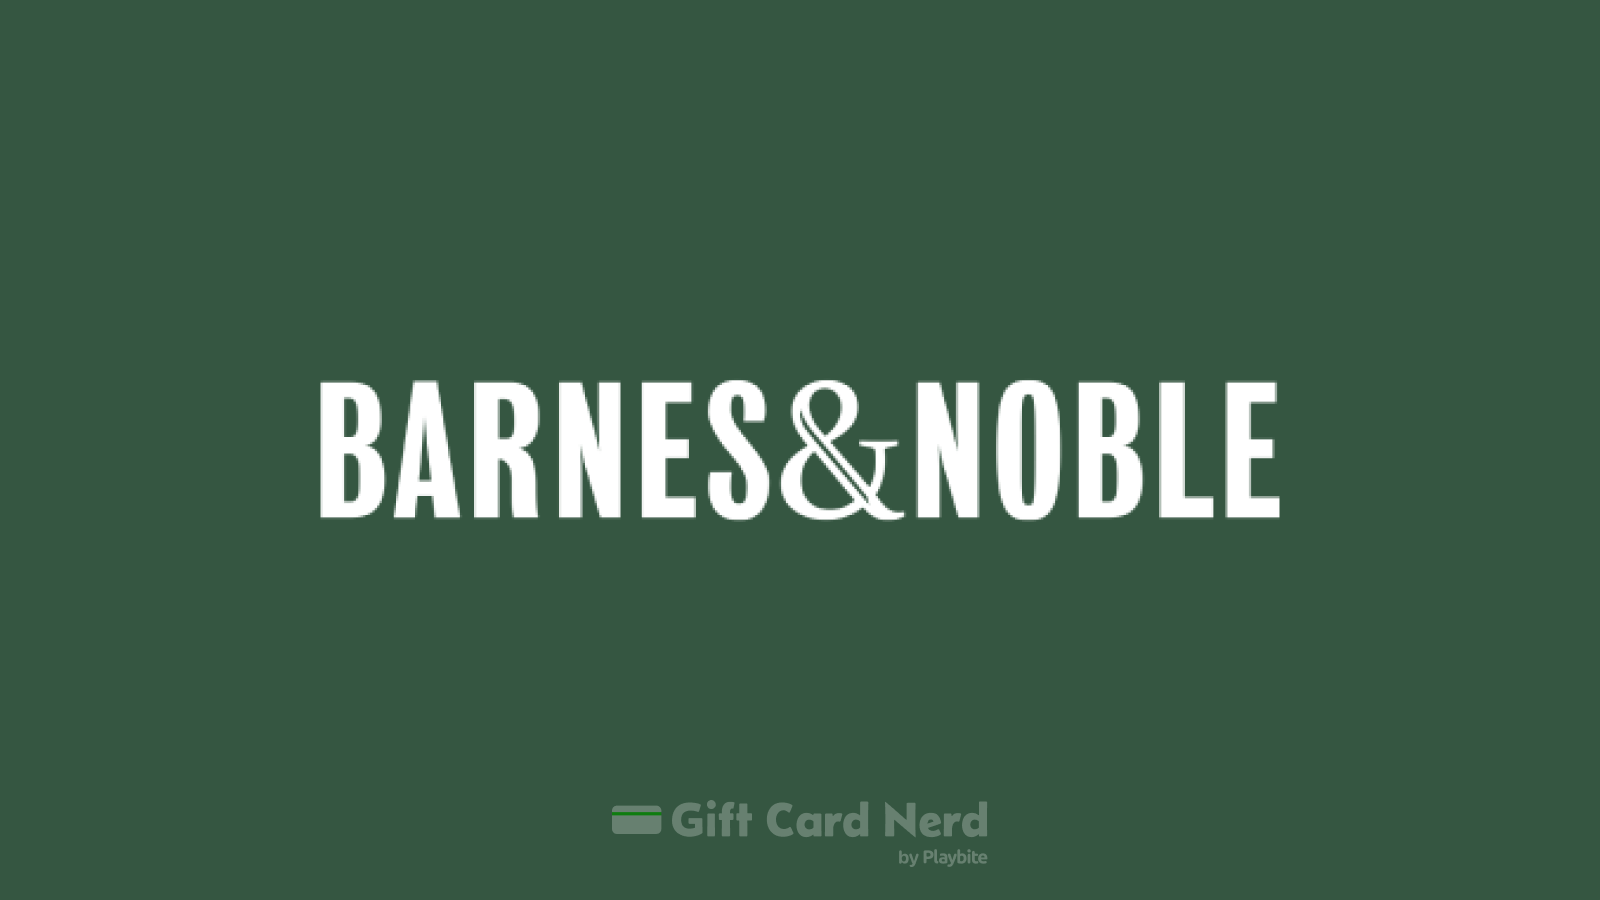 Can I Use a Barnes and Noble Gift Card on Google Play Store?